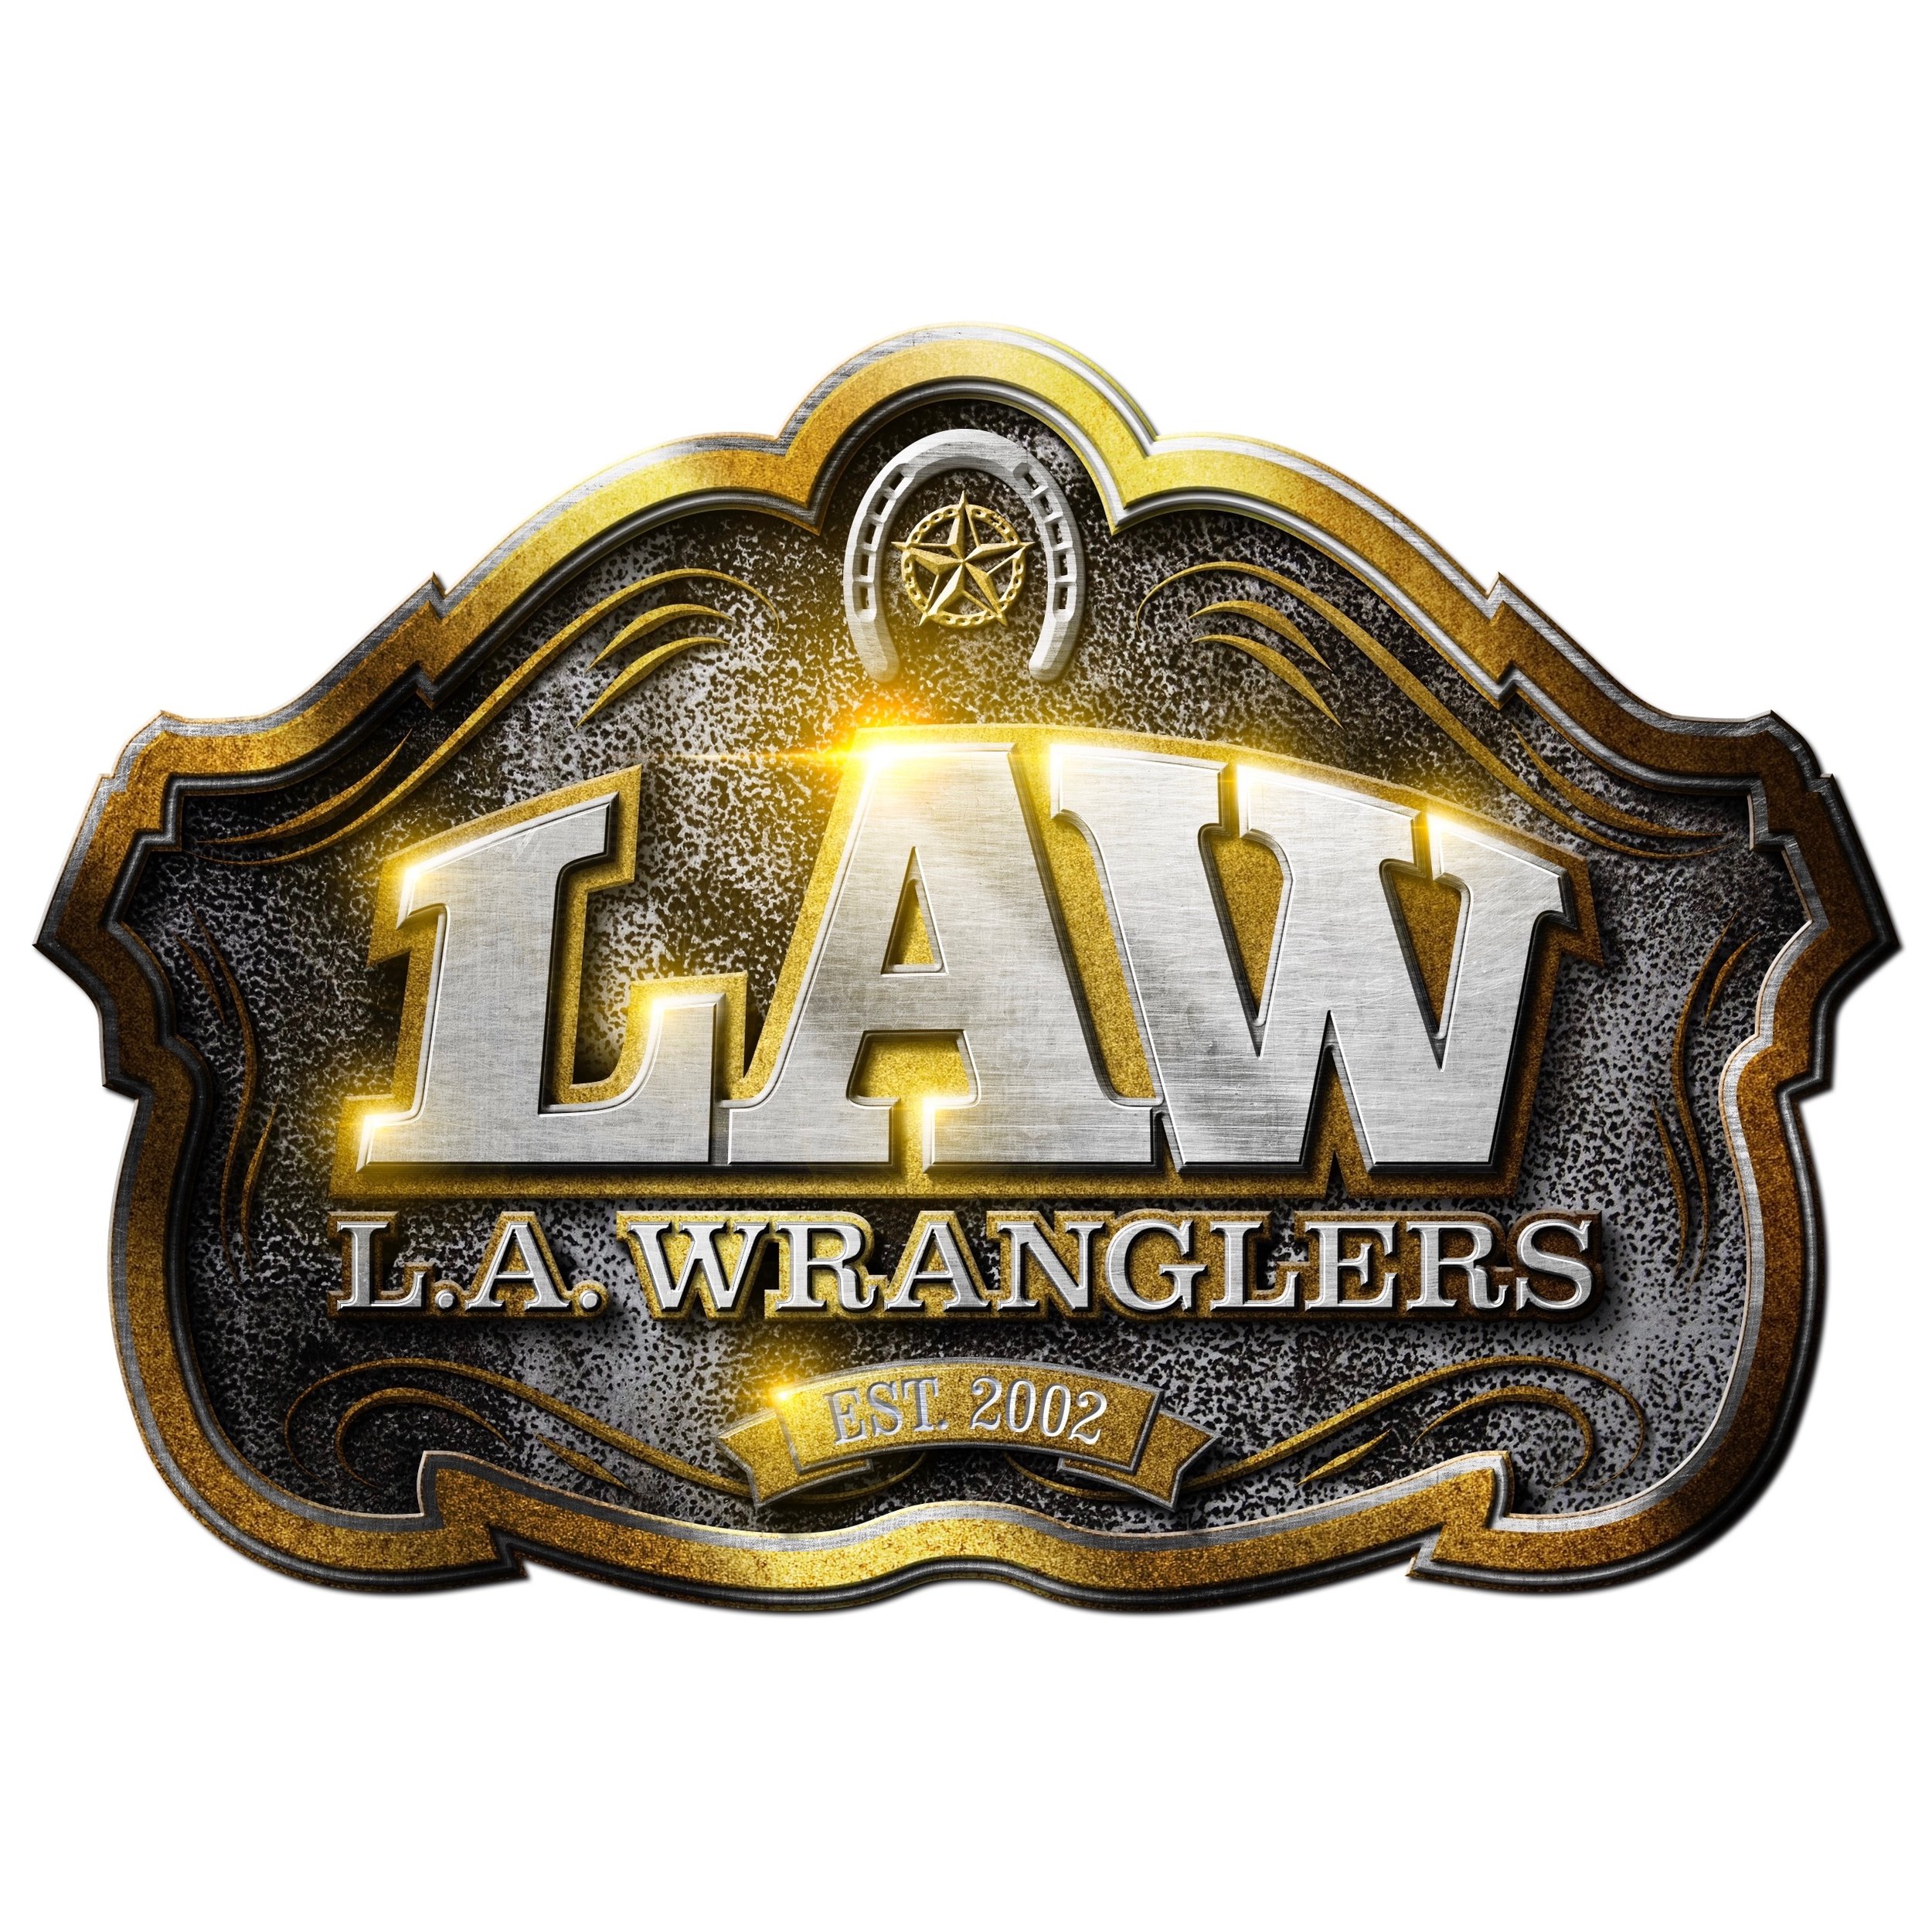 The L.A. Wranglers